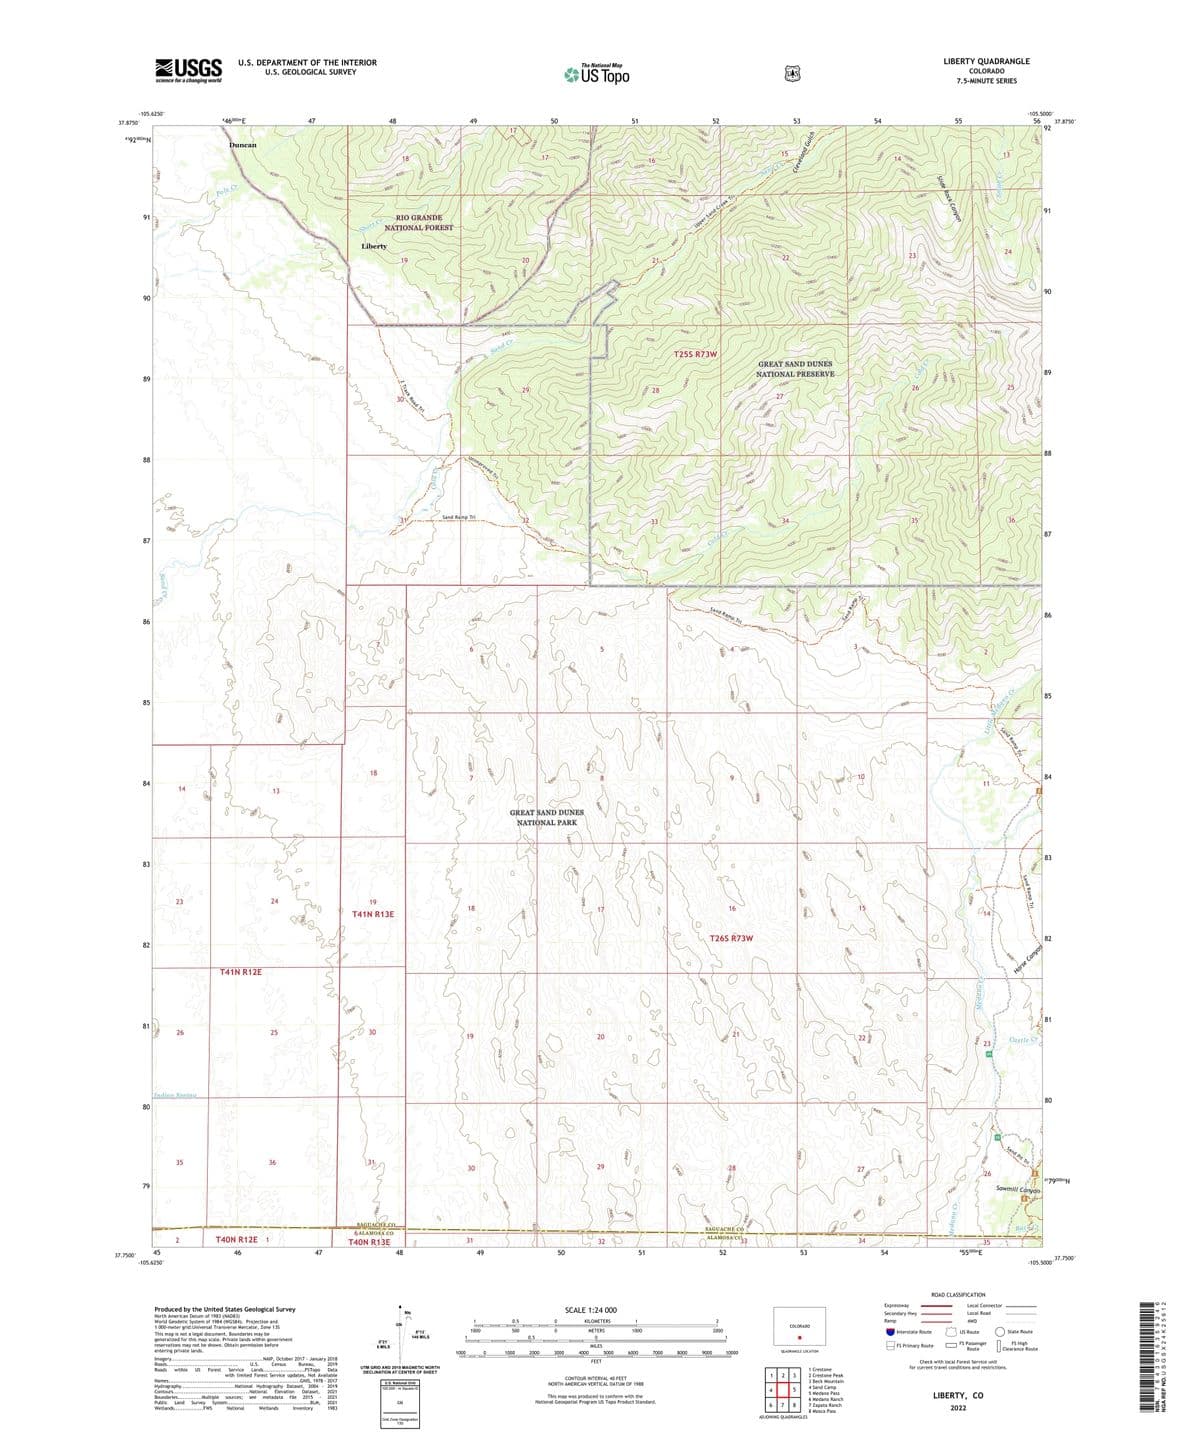 37.8750°
USGS
science for a changing world
U.S. DEPARTMENT OF THE INTERIOR
U.S. GEOLOGICAL SURVEY
-105.6250°
4192000m N
91
8000
7950
90
90
446000m E
47
48
Duncan
Pole Cr
-8200-
-8600-
18
-9000-
-8800-
-9800-
9600
Short Cr
RIO GRANDE
NATIONAL FOREST
Liberty
19
89
30
88
L7800
88
87
7800
86
98
85
Sand
8000
84
14
13
83
33
82
62
OOLLY
81
188
-8000
14
49
-9600-
9000
8800
17
The National Map
US Topo
17
50
10800
-11400
11200
11000-
51
-0090
10200-
-9800-
10000-
10400-
9200-
<8200
-8200-
-8400-
Sand Cr
8400
Track
Road
ad Trl
Unimproved Tri
18
00
Sand Ramp Trl
8000
2006-
29
9000-
-9600-
10400-
10200
16
8800
-9800-
-10800
-10600
UAS
52
53
9000
8800
-9600)
9400-
9200-
Upper Sand Creek Trl
-9000-
Sand C
15
9600-
Clevela
Gulch
0086
9200-
-9400-
28
9200-
9400
9800-
10000
8800
8600
8400
-8600
J
7
23
24
19
18
T41N R13
26
80
60
Indian Spring
79
35
T41N R12E
25
30
19
19
36
36
2
T40N R12E 1
45
46
47
37.7500°
17
-105.6250°
SAGUACHE CO
6 ALAMOSA CO
T40N R13E
30
30
31
48
Produced by the United States Geological Survey
North American Datum of 1983 (NAD83)
World Geodetic System of 1984 (WGS84). Projection and
1 000-meter grid: Universal Transverse Mercator, Zone 13S
This map is not a legal document. Boundaries may be
generalized for this map scale. Private lands within government
reservations may not be shown. Obtain permission before
entering private lands.
.NAIP, October 2017 January 2018
U.S.
Census Bureau,
2019
Service
Lands....
.FSTopo Data
with limited Forest Service updates, Not Available
.GNIS, 1978 2017
.National Hydrography Dataset, 2004 - 2019
.National Elevation Dataset, 2021
see metadata file 2015
Imagery..
Roads..
Roads within US
Forest
Names.......
Hydrography.
Contours.....
Boundaries...
Public Land Survey System...
Wetlands...
.Multiple sources;
..FWS
National
Wetlands
MN
GN
8°13'
146 MILS
0°21'
6 MILS
UTM GRID AND 2019 MAGNETIC NORTH
DECLINATION AT CENTER OF SHEET
U.S. National Grid
100,000 m Square ID
2021
.BLM,
2021
DB
Inventory
1983
Grid Zone Designation.
13S
8400
GREAT SAND DUNES
NATIONAL PARK
49
-0078-
-8200
8400
5
8400
8
17
20
33
29
T25S-R73W
8400-
10000-
-9400-
10200
22
10600
10400-
10800
1,1200
1-1000-
11800
GREAT SAND DUNES
NATIONAL PRESERVE
10400
-10800-
10600-
10200
10000
-9600-
-9400
8800
Cold/Cr
9200
Coo+8-
مع
0
8400
27
-9800)
9000
Sand Ramp Trl
9000
8400
Ро
8800
16
34
T26S R73W
21
осохо
8400-00
28
-9200-
9600
9400
1.1.400
9800-
0098)
54
54
0000
14
-10200-
-10400-
10600-
11600-
Sand Ramp
3
10800
23
-9400-
8600
1.0
SAGUACHE CO
ALAMOSA Ce
32
CC33
50
50
51
52
53
SCALE 1:24 000
1
0.5
0
KILOMETERS
1
1000
500
0
METERS
1000
0.5
0
2
2000
1
MILES
1000
0
1000
2000
3000
4000
5000
6000
7000
8000
9000
10000
FEET
CONTOUR INTERVAL 40 FEET
NORTH AMERICAN VERTICAL DATUM OF 1988
This map was produced to conform with the
National Geospatial Program US Topo Product Standard.
COLORADO
10000
26
LIBERTY QUADRANGLE
COLORADO
7.5-MINUTE SERIES
55
Slide Rock Canyon
1-1800
12000-
-10200-
(35
10200
-8800-
1400-
1-1200
8600-
-8600-
QUADRANGLE LOCATION
0098
-8600-
22
22
<0098
8600
во
27
8600
1 Crestone
1
2
3
2 Crestone Peak
3 Beck Mountain
4
5
4 Sand Camp
5 Medano Pass
6 Medano Ranch
6 7 8
7 Zapata Ranch
ADJOINING QUADRANGLES
8 Mosca Pass
8400-
8400-
6088
34
54
-9200-
8600-
-8400-
11000
11400
13
Smith Cr
-12400-
1-1000-
-9800
24
1-1800
Expressway
Secondary Hwy
Ramp
1-1800
-105.5000°
56
92
37.8750°
11800
91
1.1600-
90
12200
89
25
-12000-
-8600-
88
36
87
-10800
10600-
<8400
10400-
Redano Cr
11
9000
Sand
Ramp
mp Trl
014
-8200-
Medano Cr
Medano Cr
・
-8400
86
85
8600-
Sand Ramp Trl
84
83
Horse Canyon
Castle Cr
23
A
82
Sand Pit Trl,
81
80
26
Sawmill Canyon-
455000mE
8400
Buck Cr
35
ROAD CLASSIFICATION
Local Connector
Local Road
4WD
4179000m N
37.7500°
-105.5000°
Interstate Route
US Route
FS Primary Route
FS Passenger
Route
State Route
FS High
Clearance Route
Check with local Forest Service unit
for current travel conditions and restrictions.
LIBERTY, CO
2022
NSN.
7 6 4 3 0 1 6 3 5 9 2 4 6
NGA REF NO. USGS X 24 K 256 12